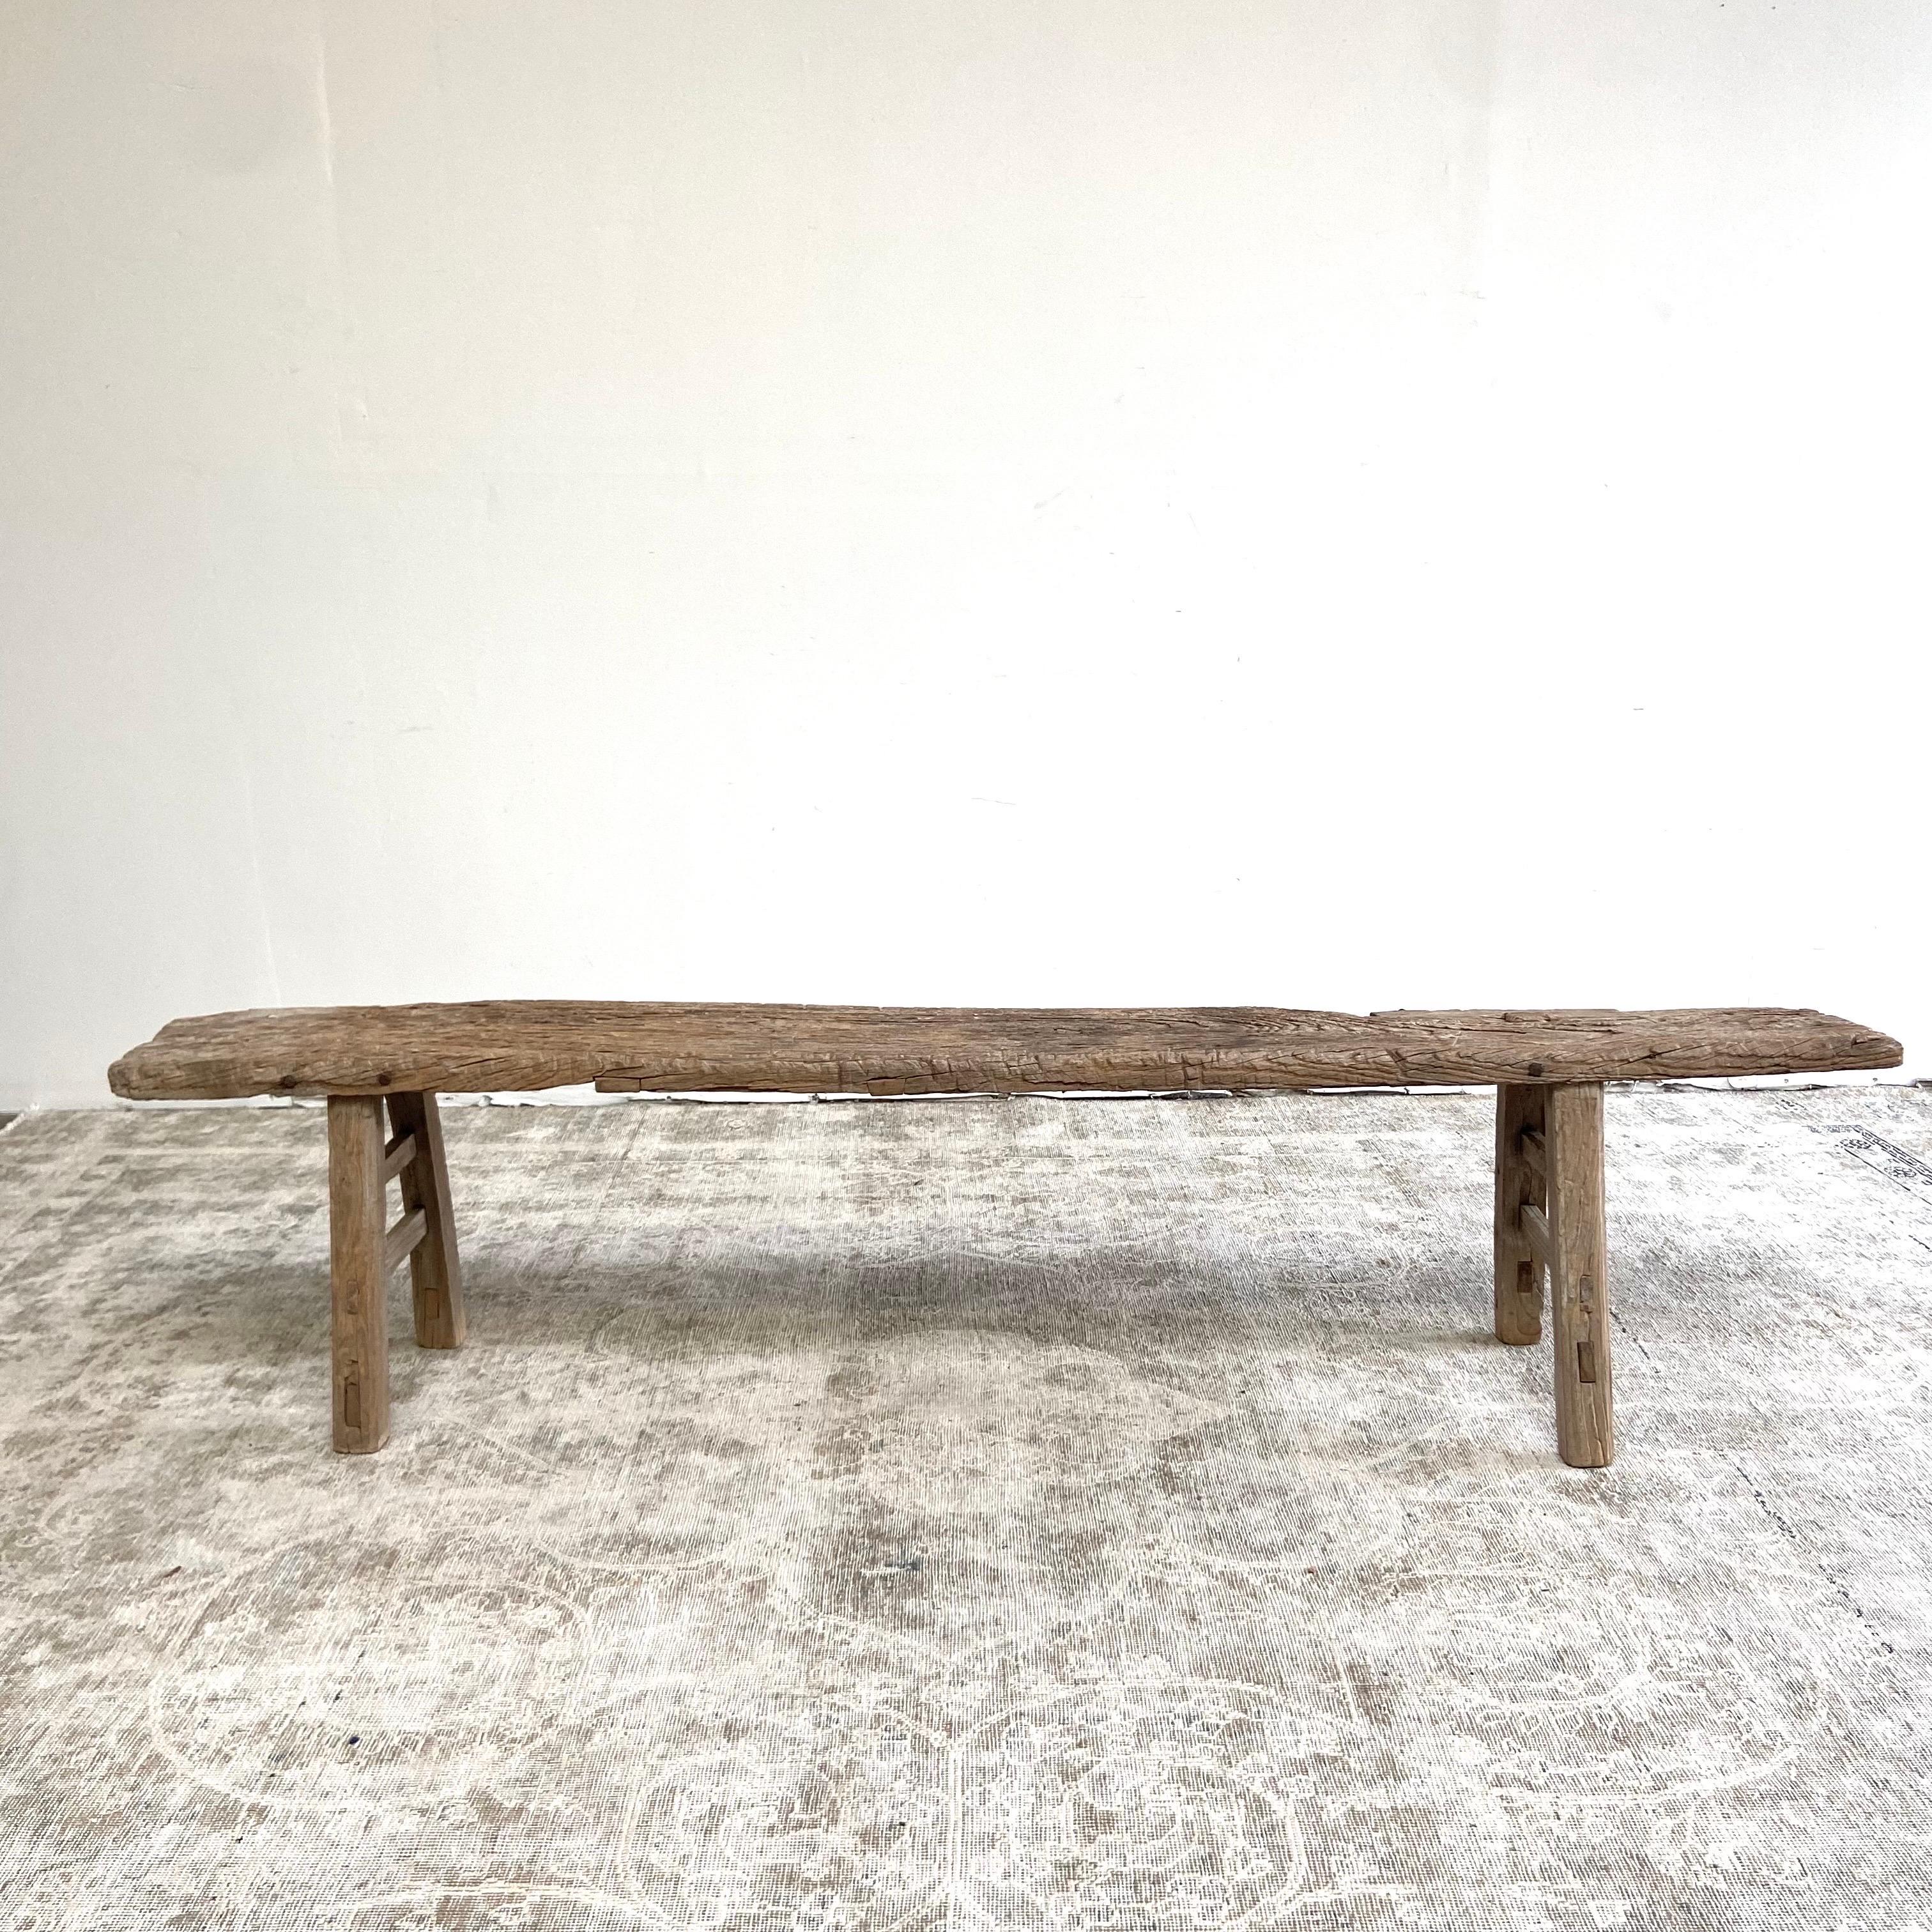 Beautiful antique patina, with weathering and age, these are solid and sturdy ready for daily use, use as a table behind a sofa, stool, coffee table, they are great for any space. Each piece is truly unique and one of a kind with different